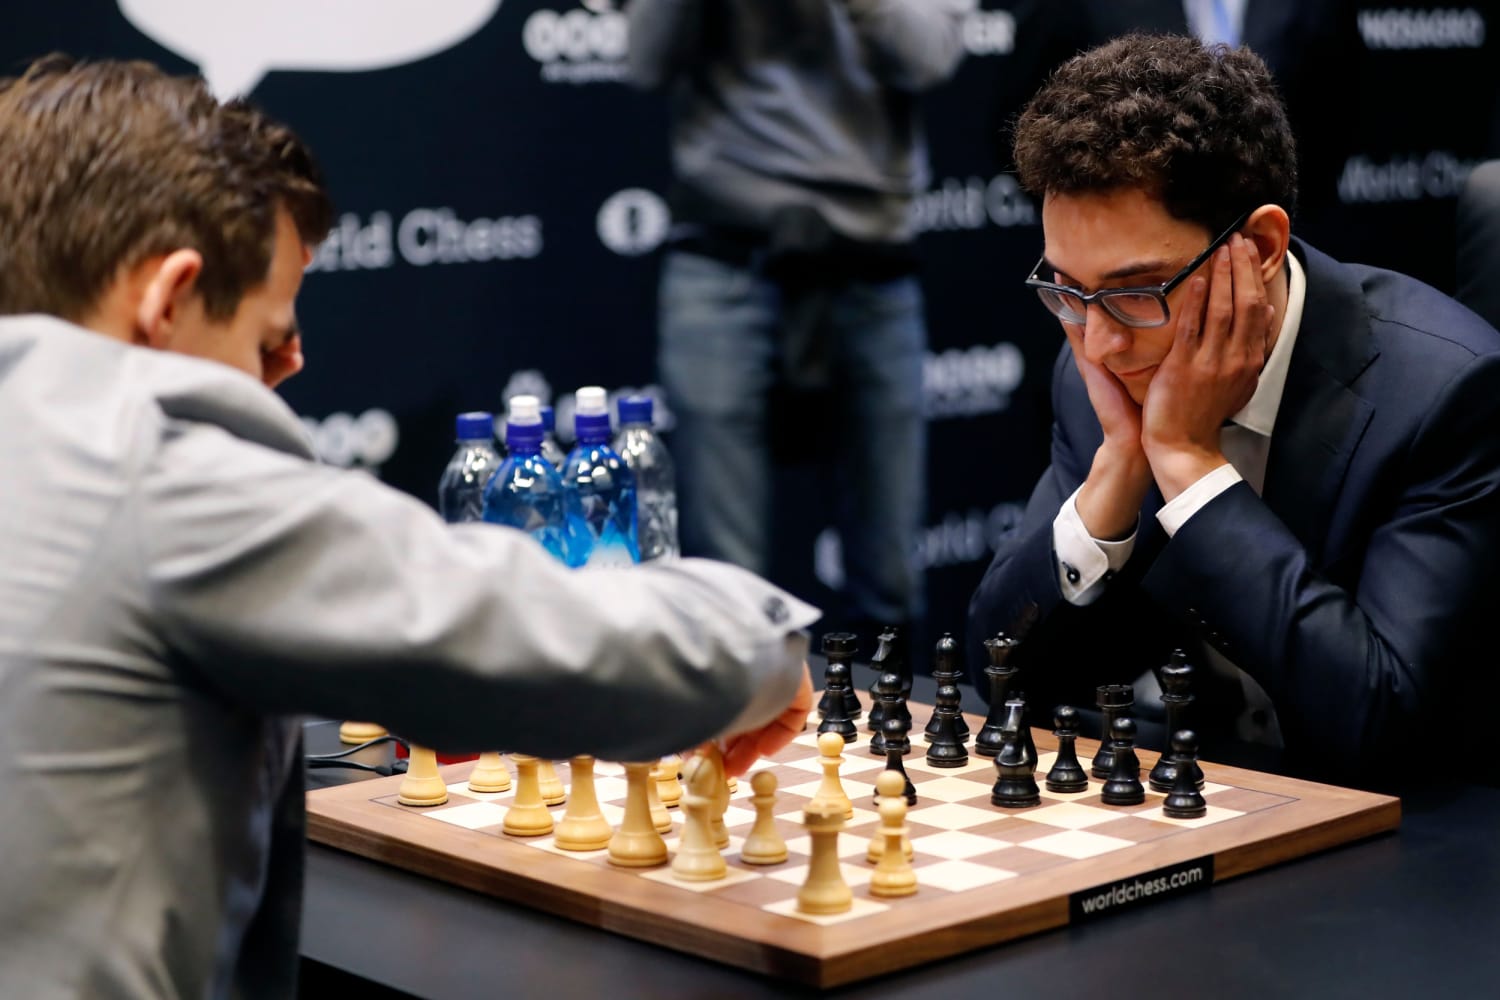 Will Magnus Carlsen be defeated as the World Chess Champion?